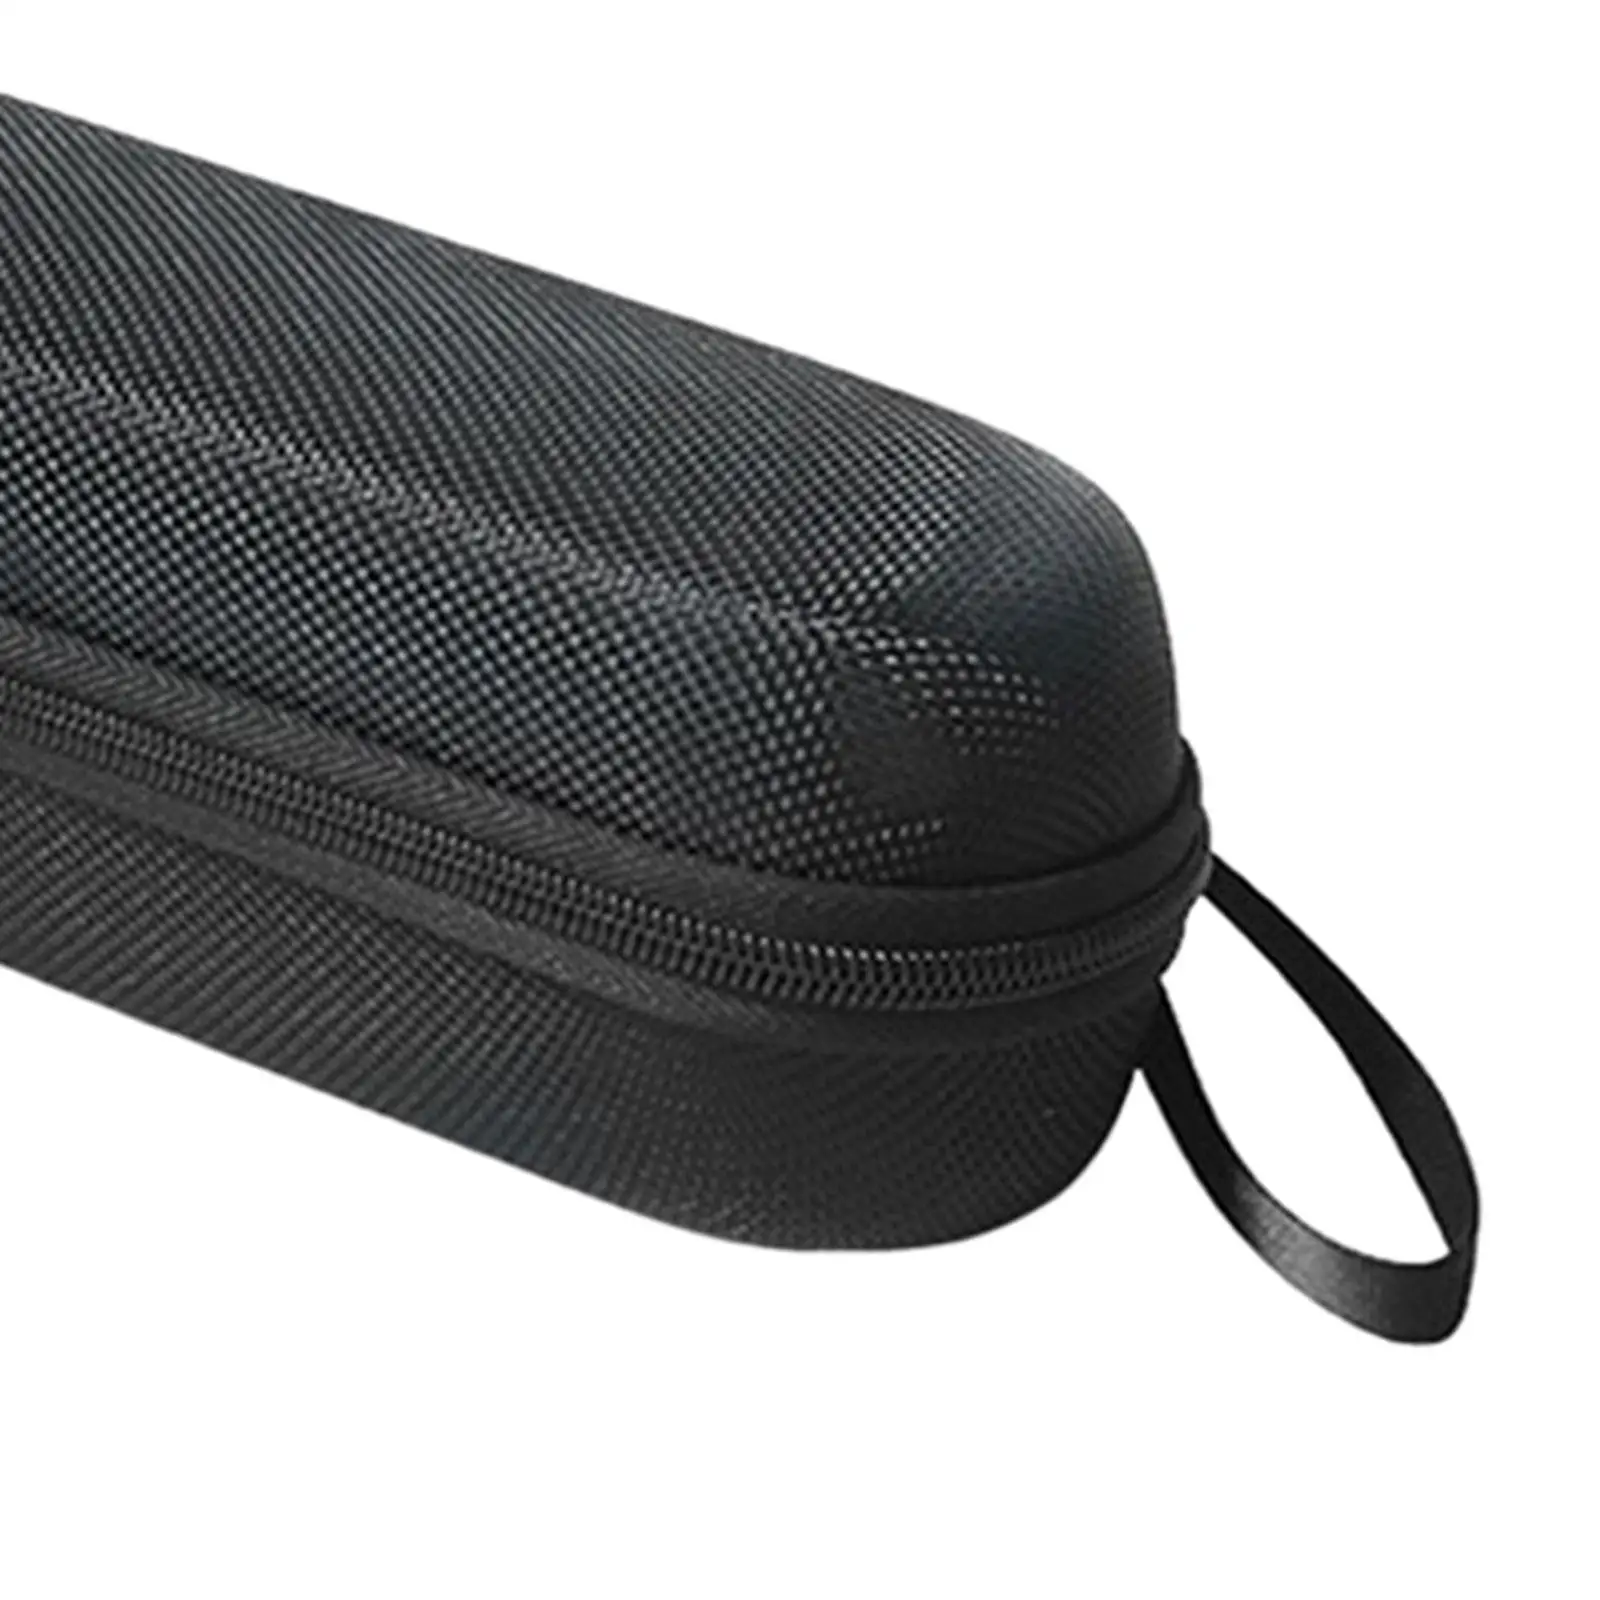 Toothbrush Travel Case with Mesh Pocket for Accessories Dustproof 278x70x70mm Easy to Carry Shockproof Convenient Toothbrush Box